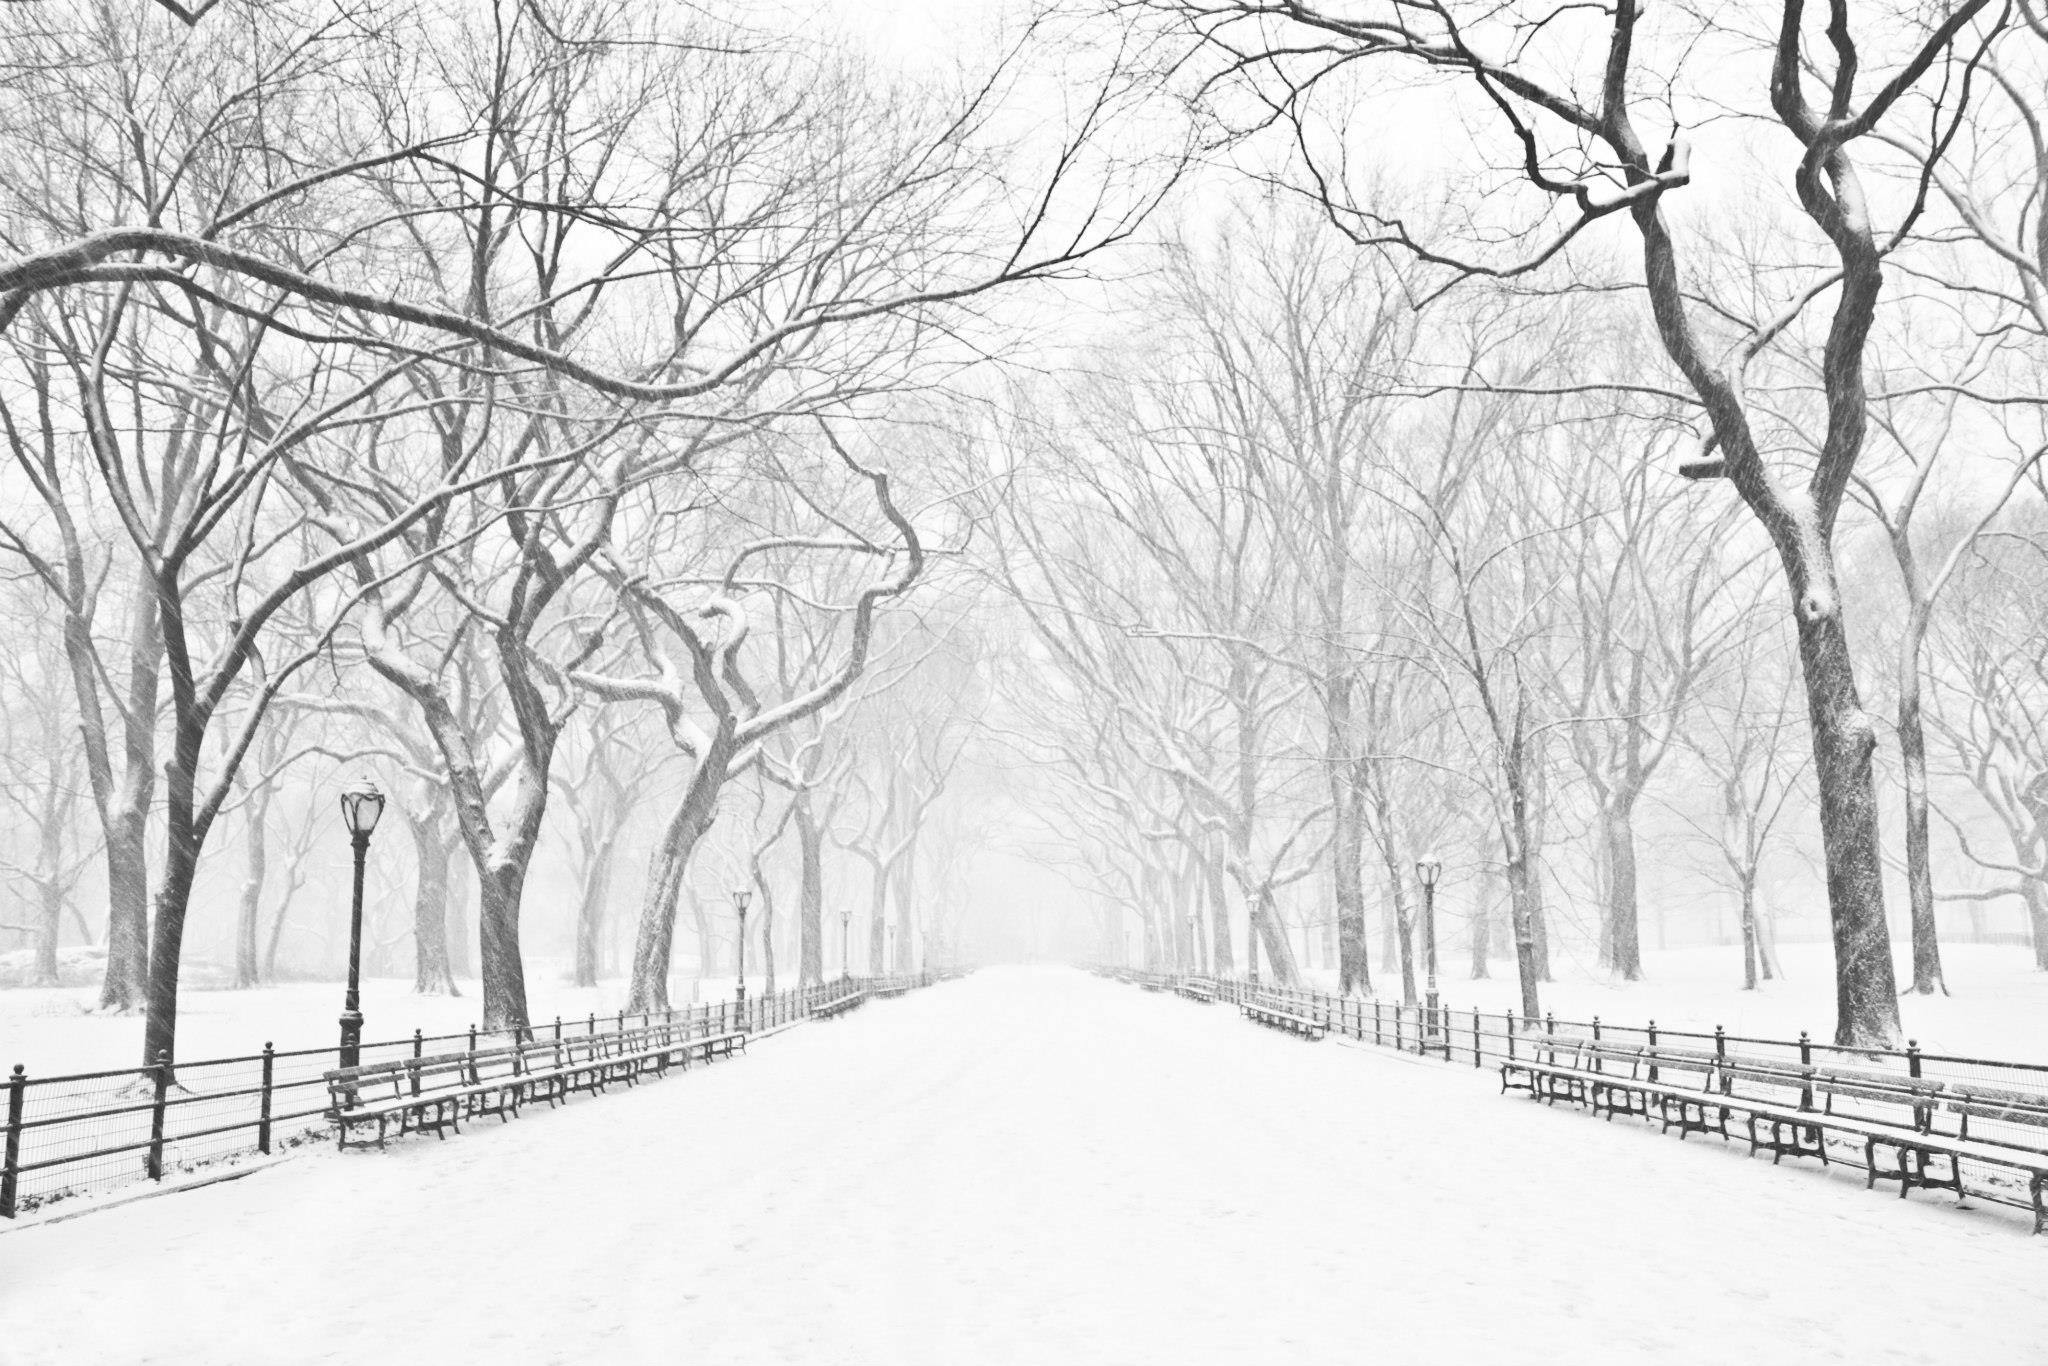 A winter scene featuring a snow-covered road lined by snow-covered fences and leafless trees